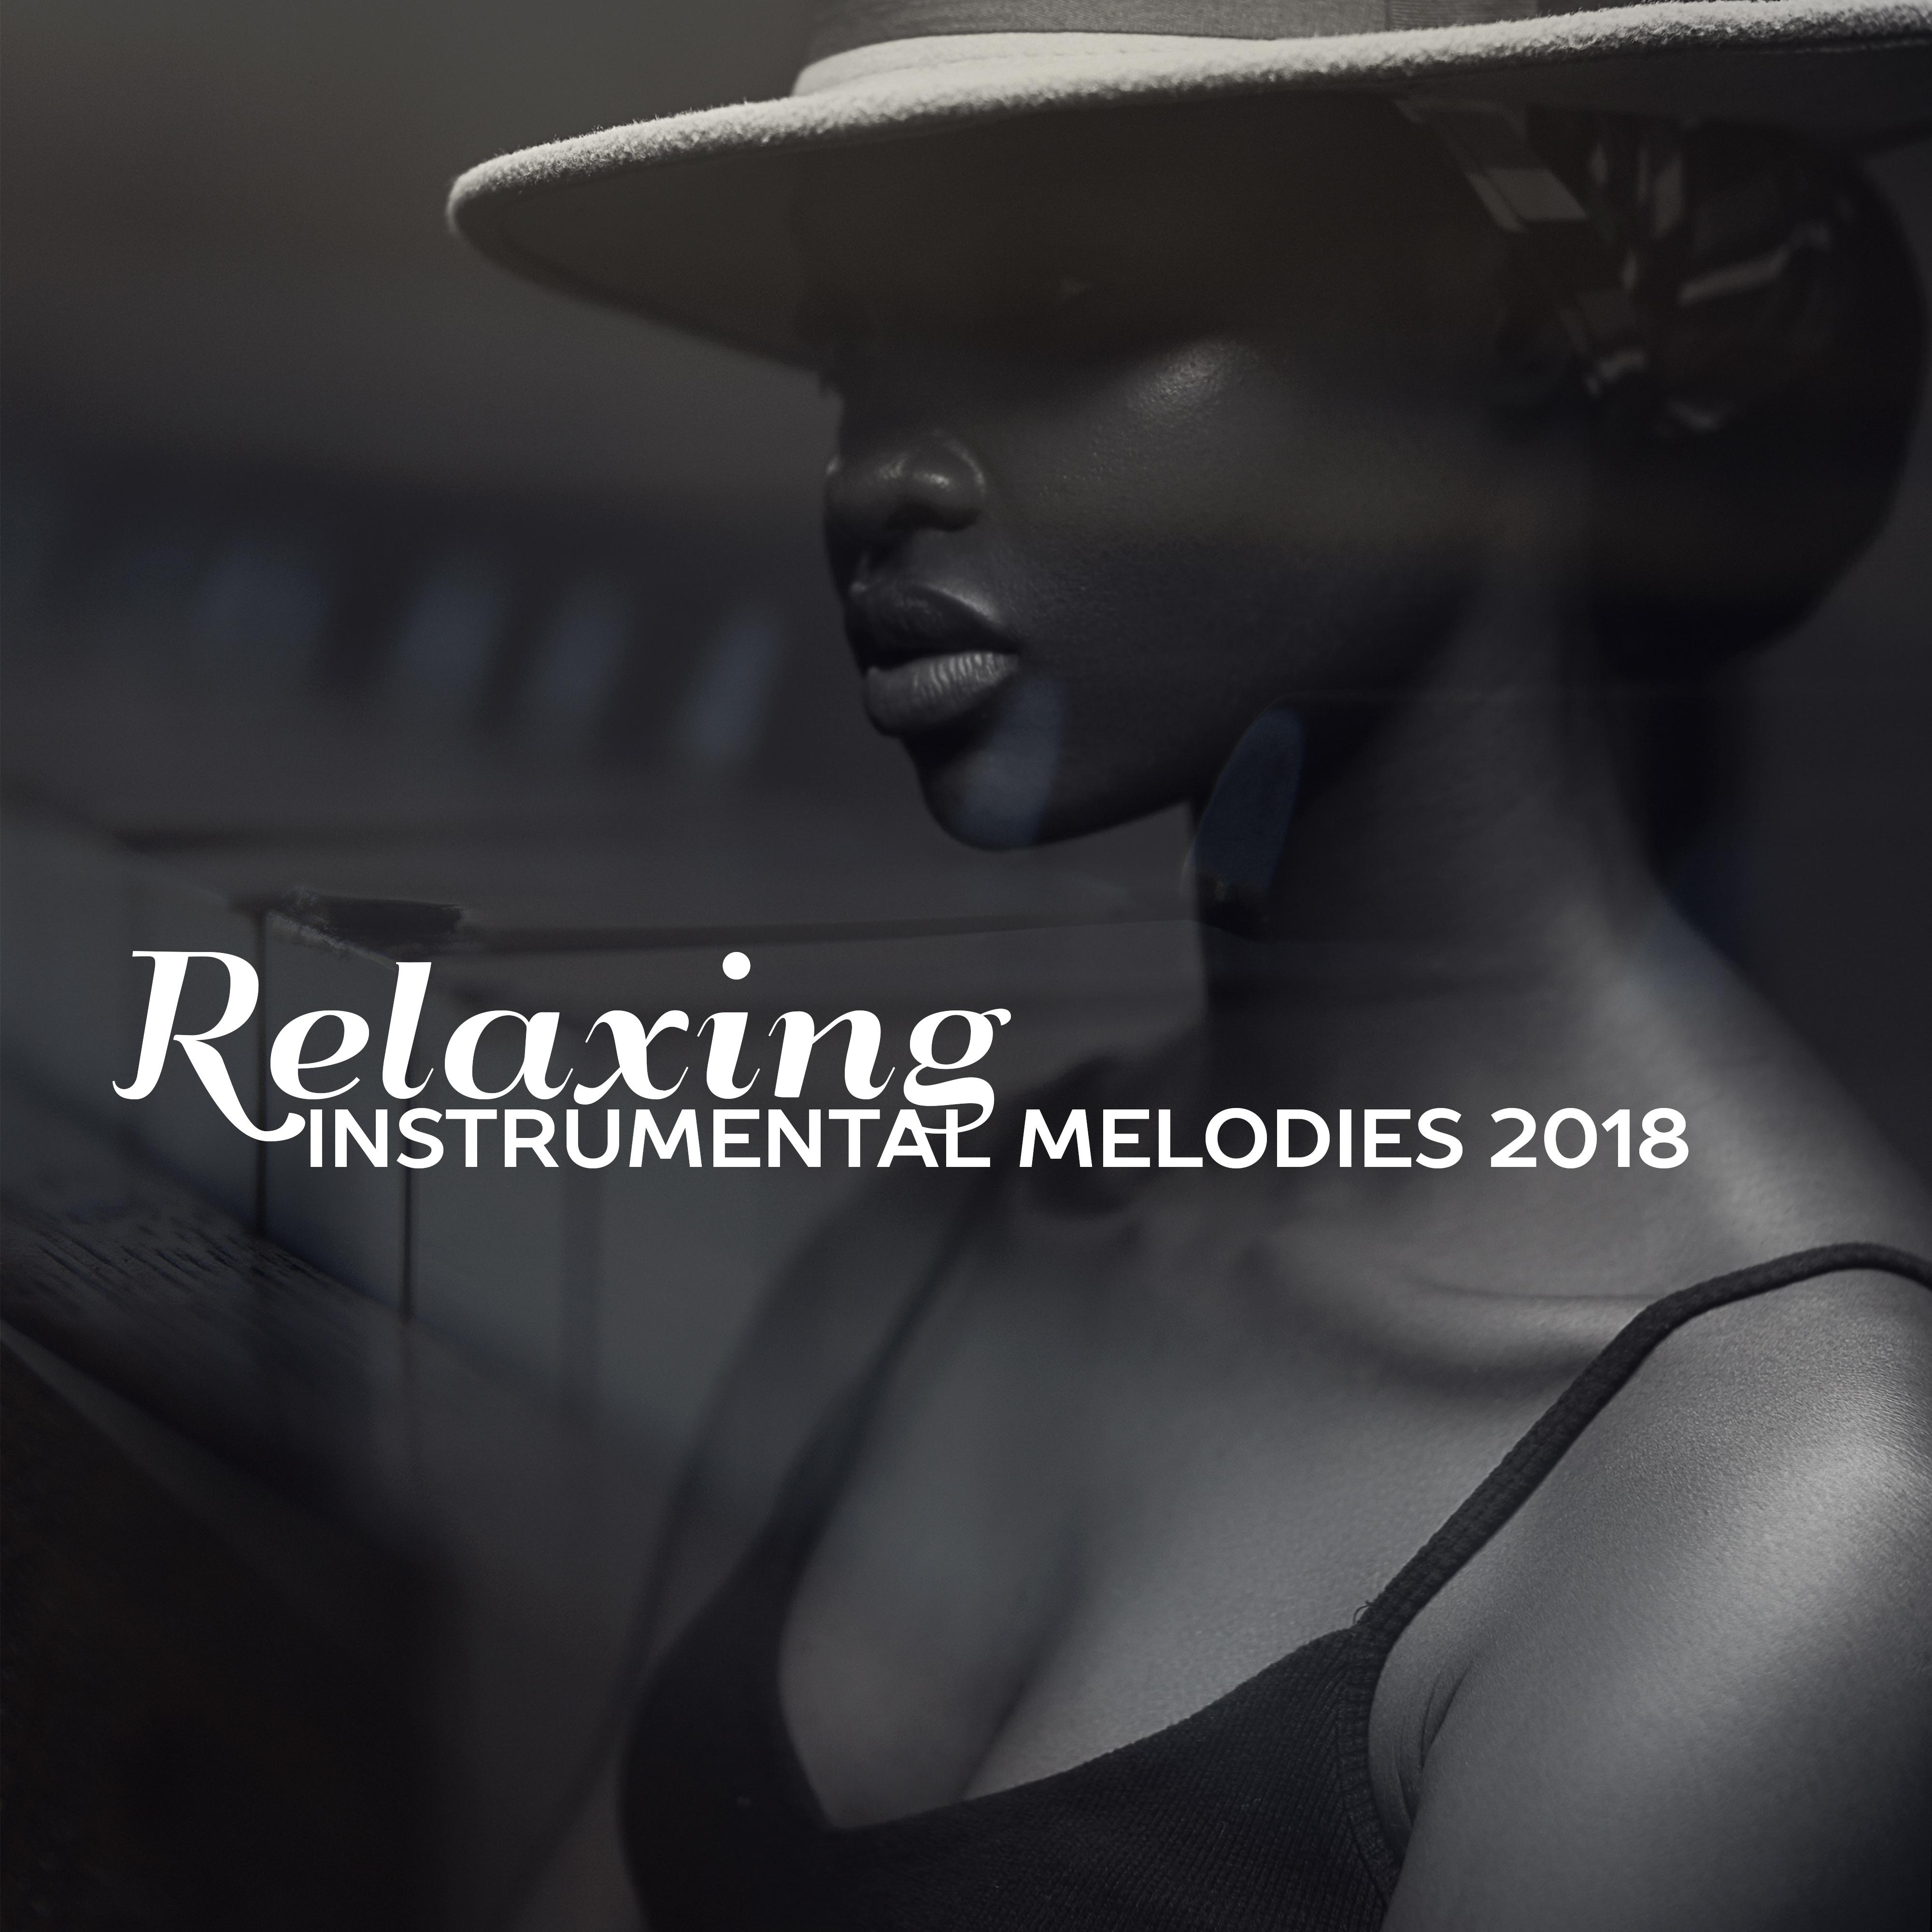 Relaxing Instrumental Melodies 2018